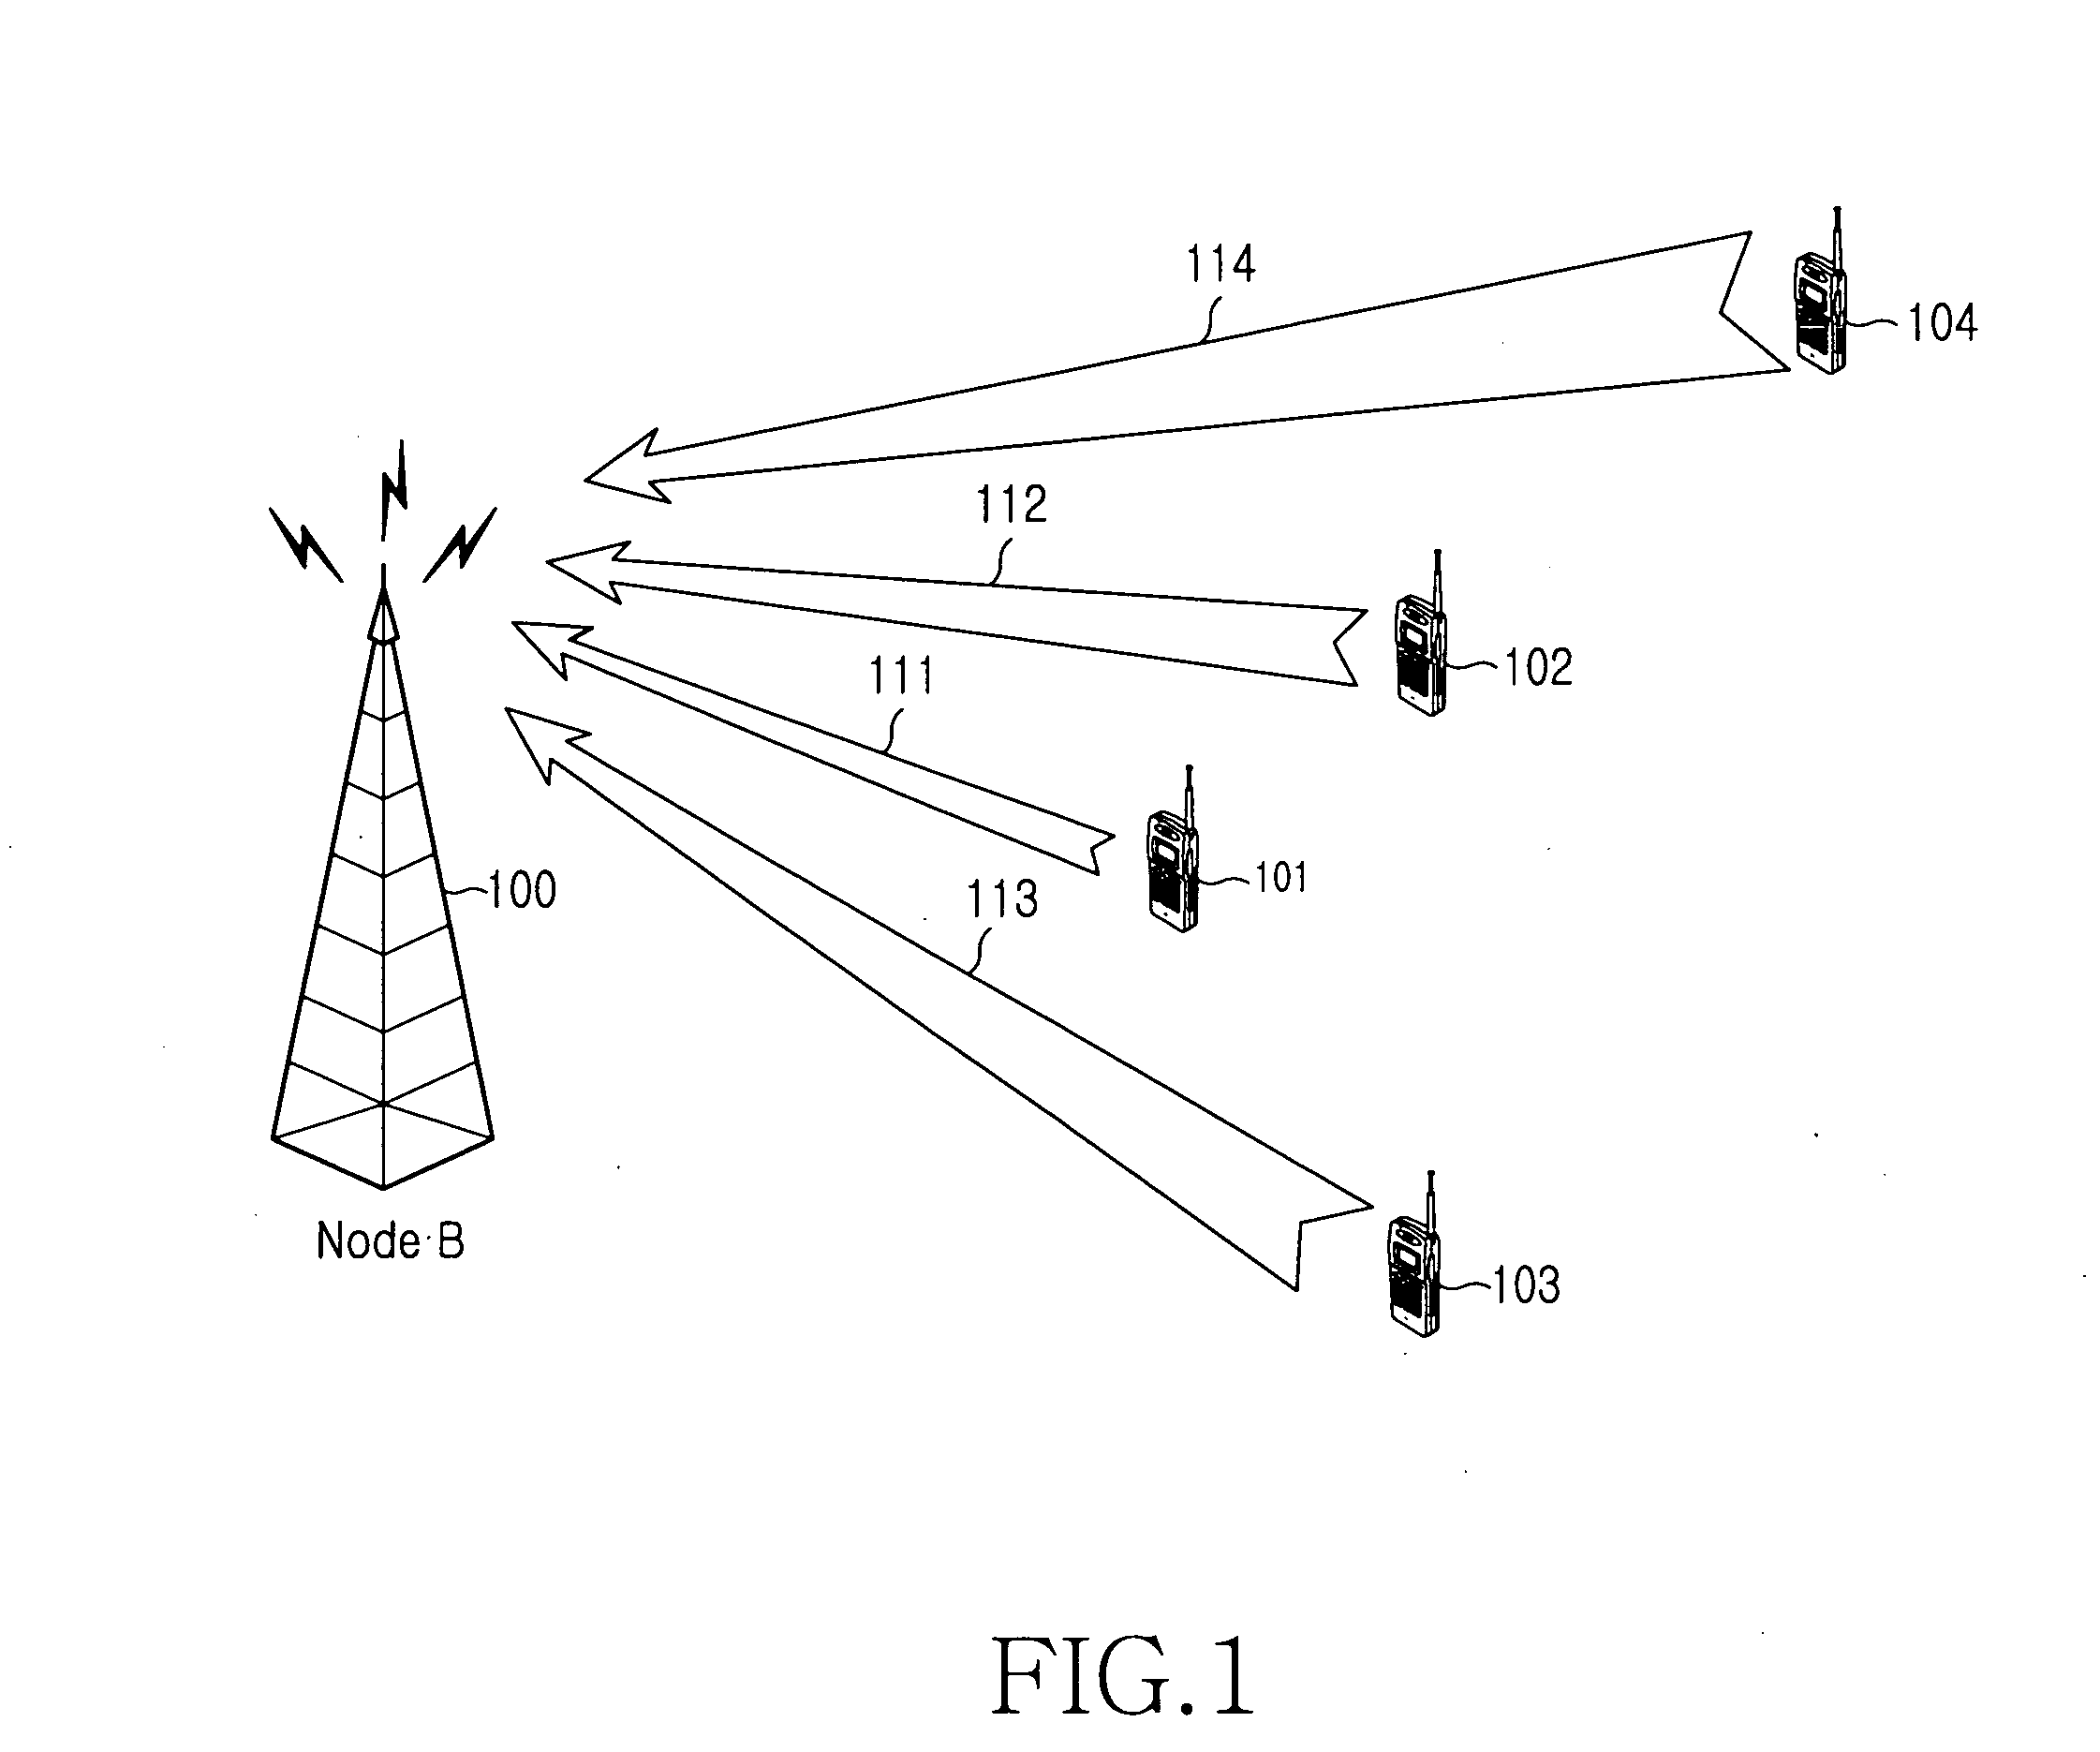 Apparatus and method for measuring and reporting uplink load in a cellular mobile communication system